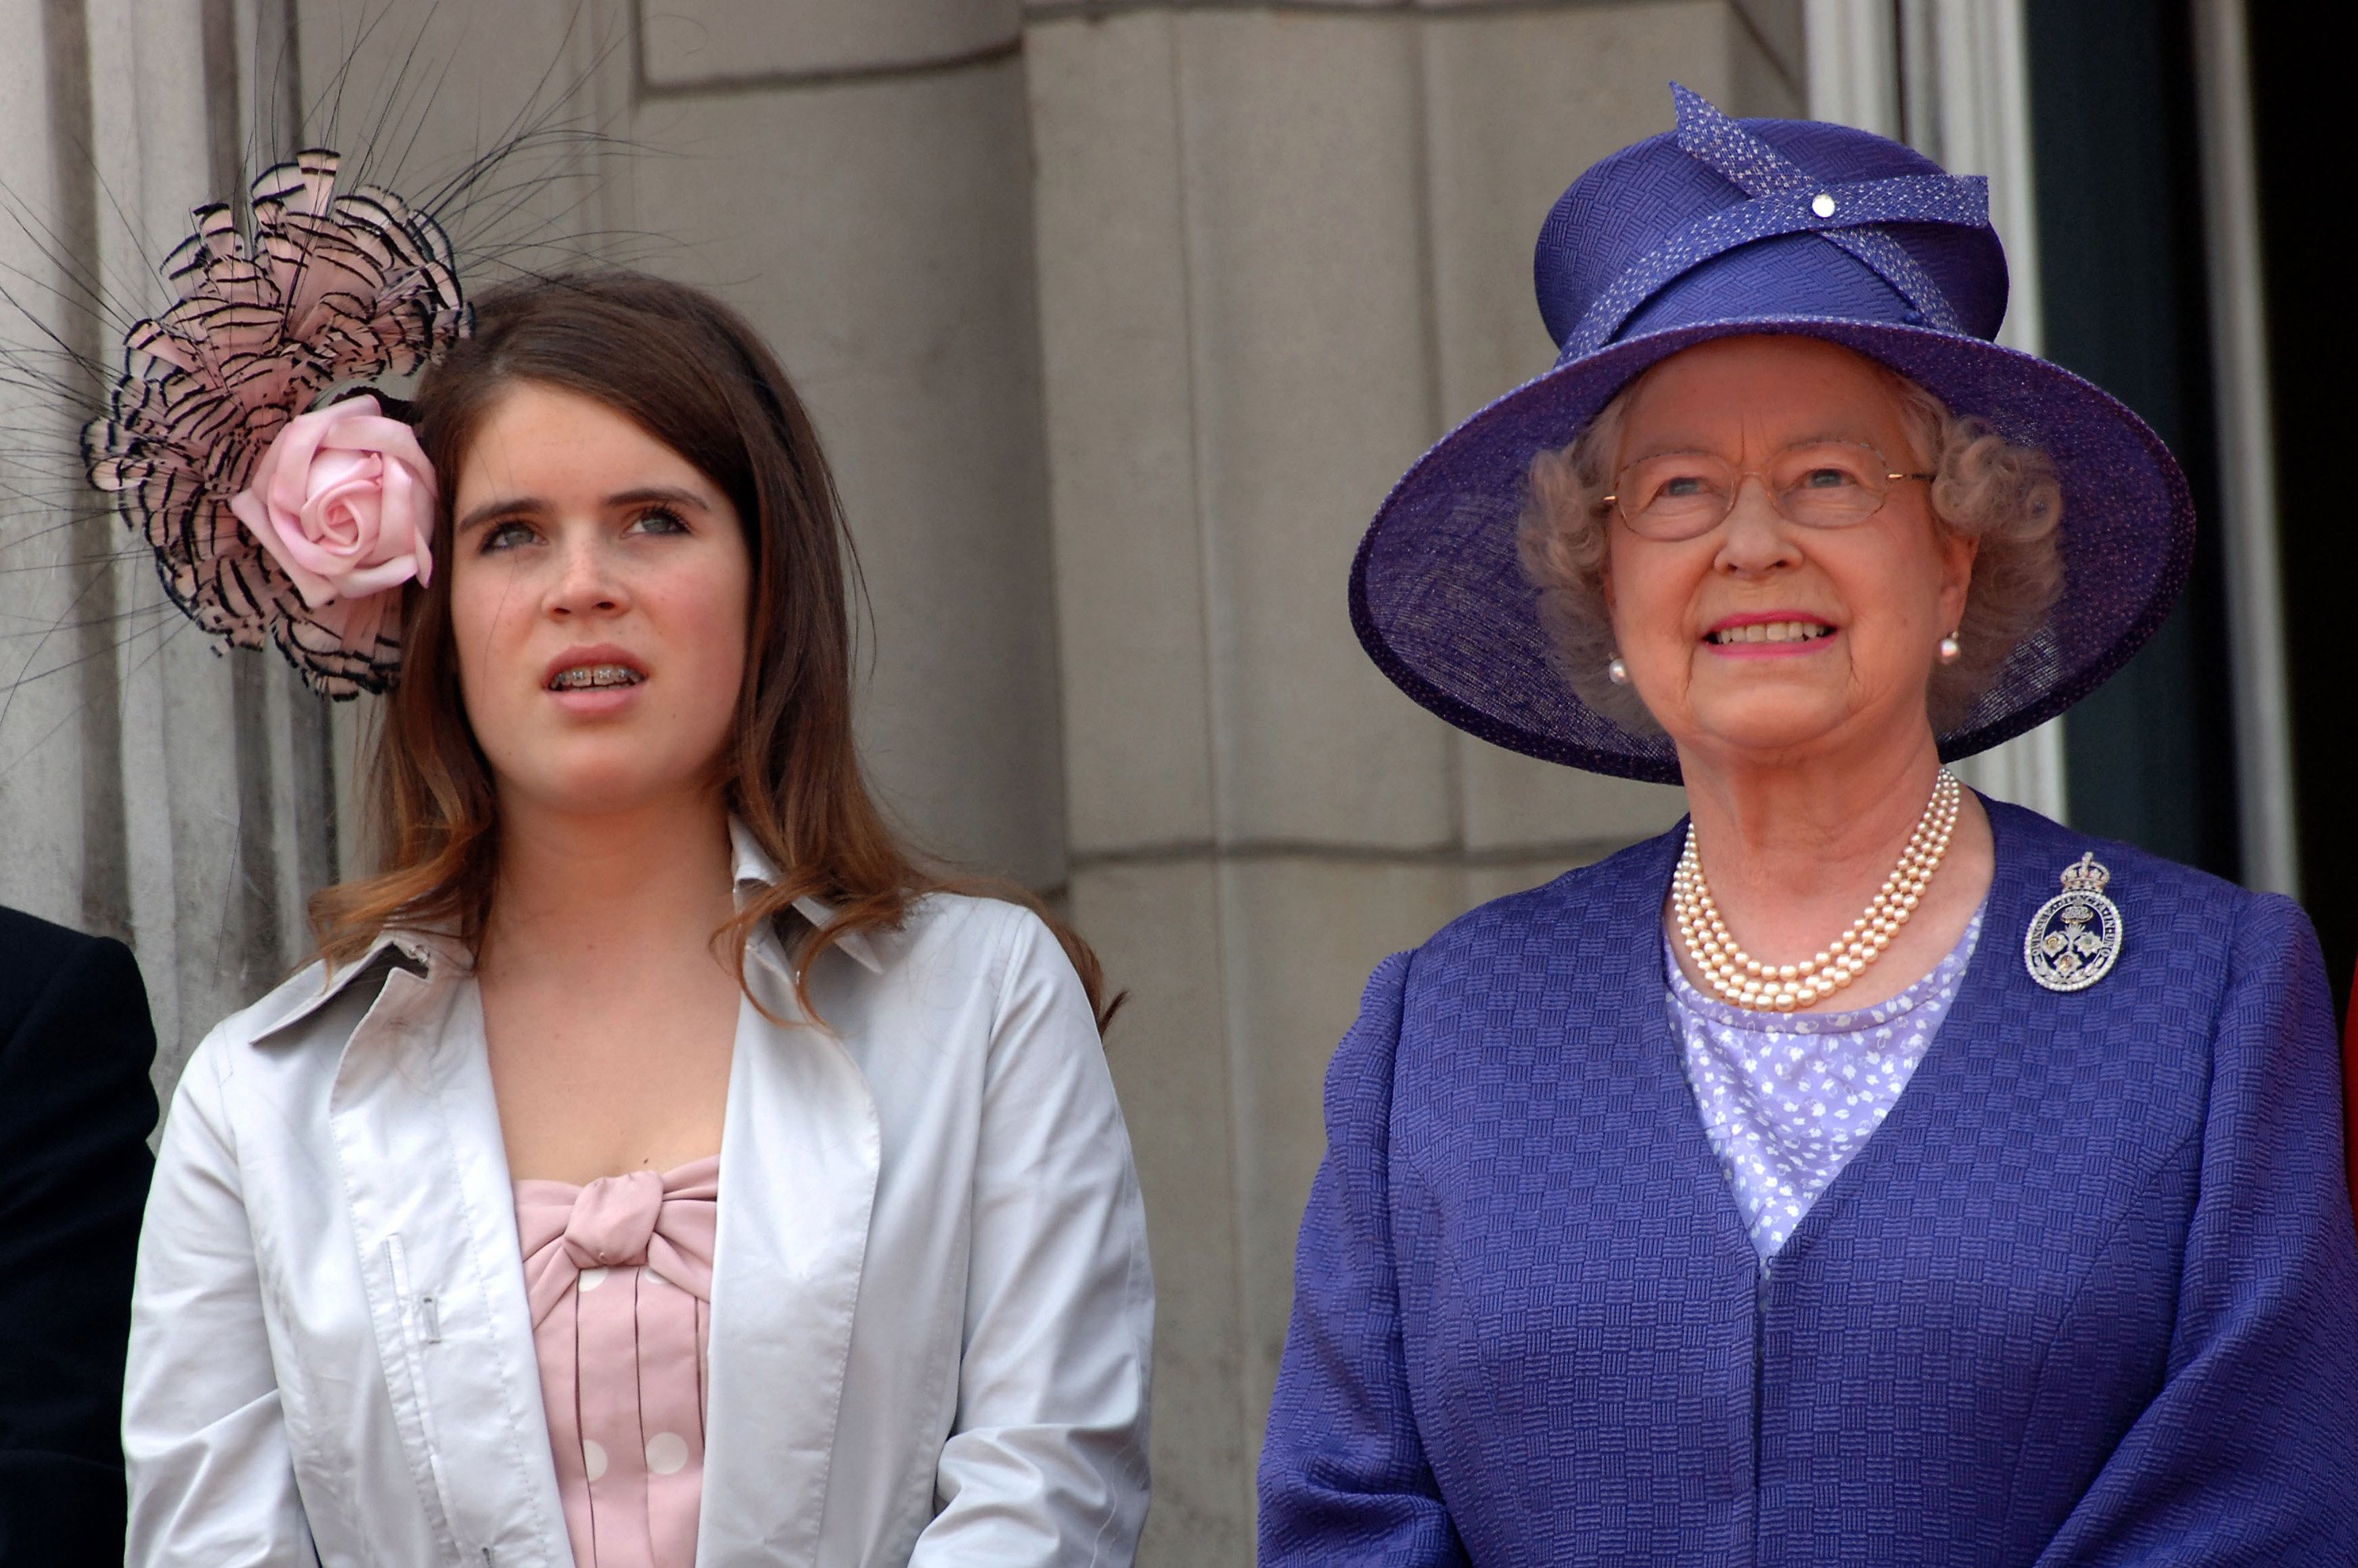 Princess Eugenie and Queen Elizabeth ll together on the balcony of Buckingham Palace following the Trooping the Colour ceremony on June 17, 2006, in London. | Source: Anwar Hussein/WireImage/Getty Images